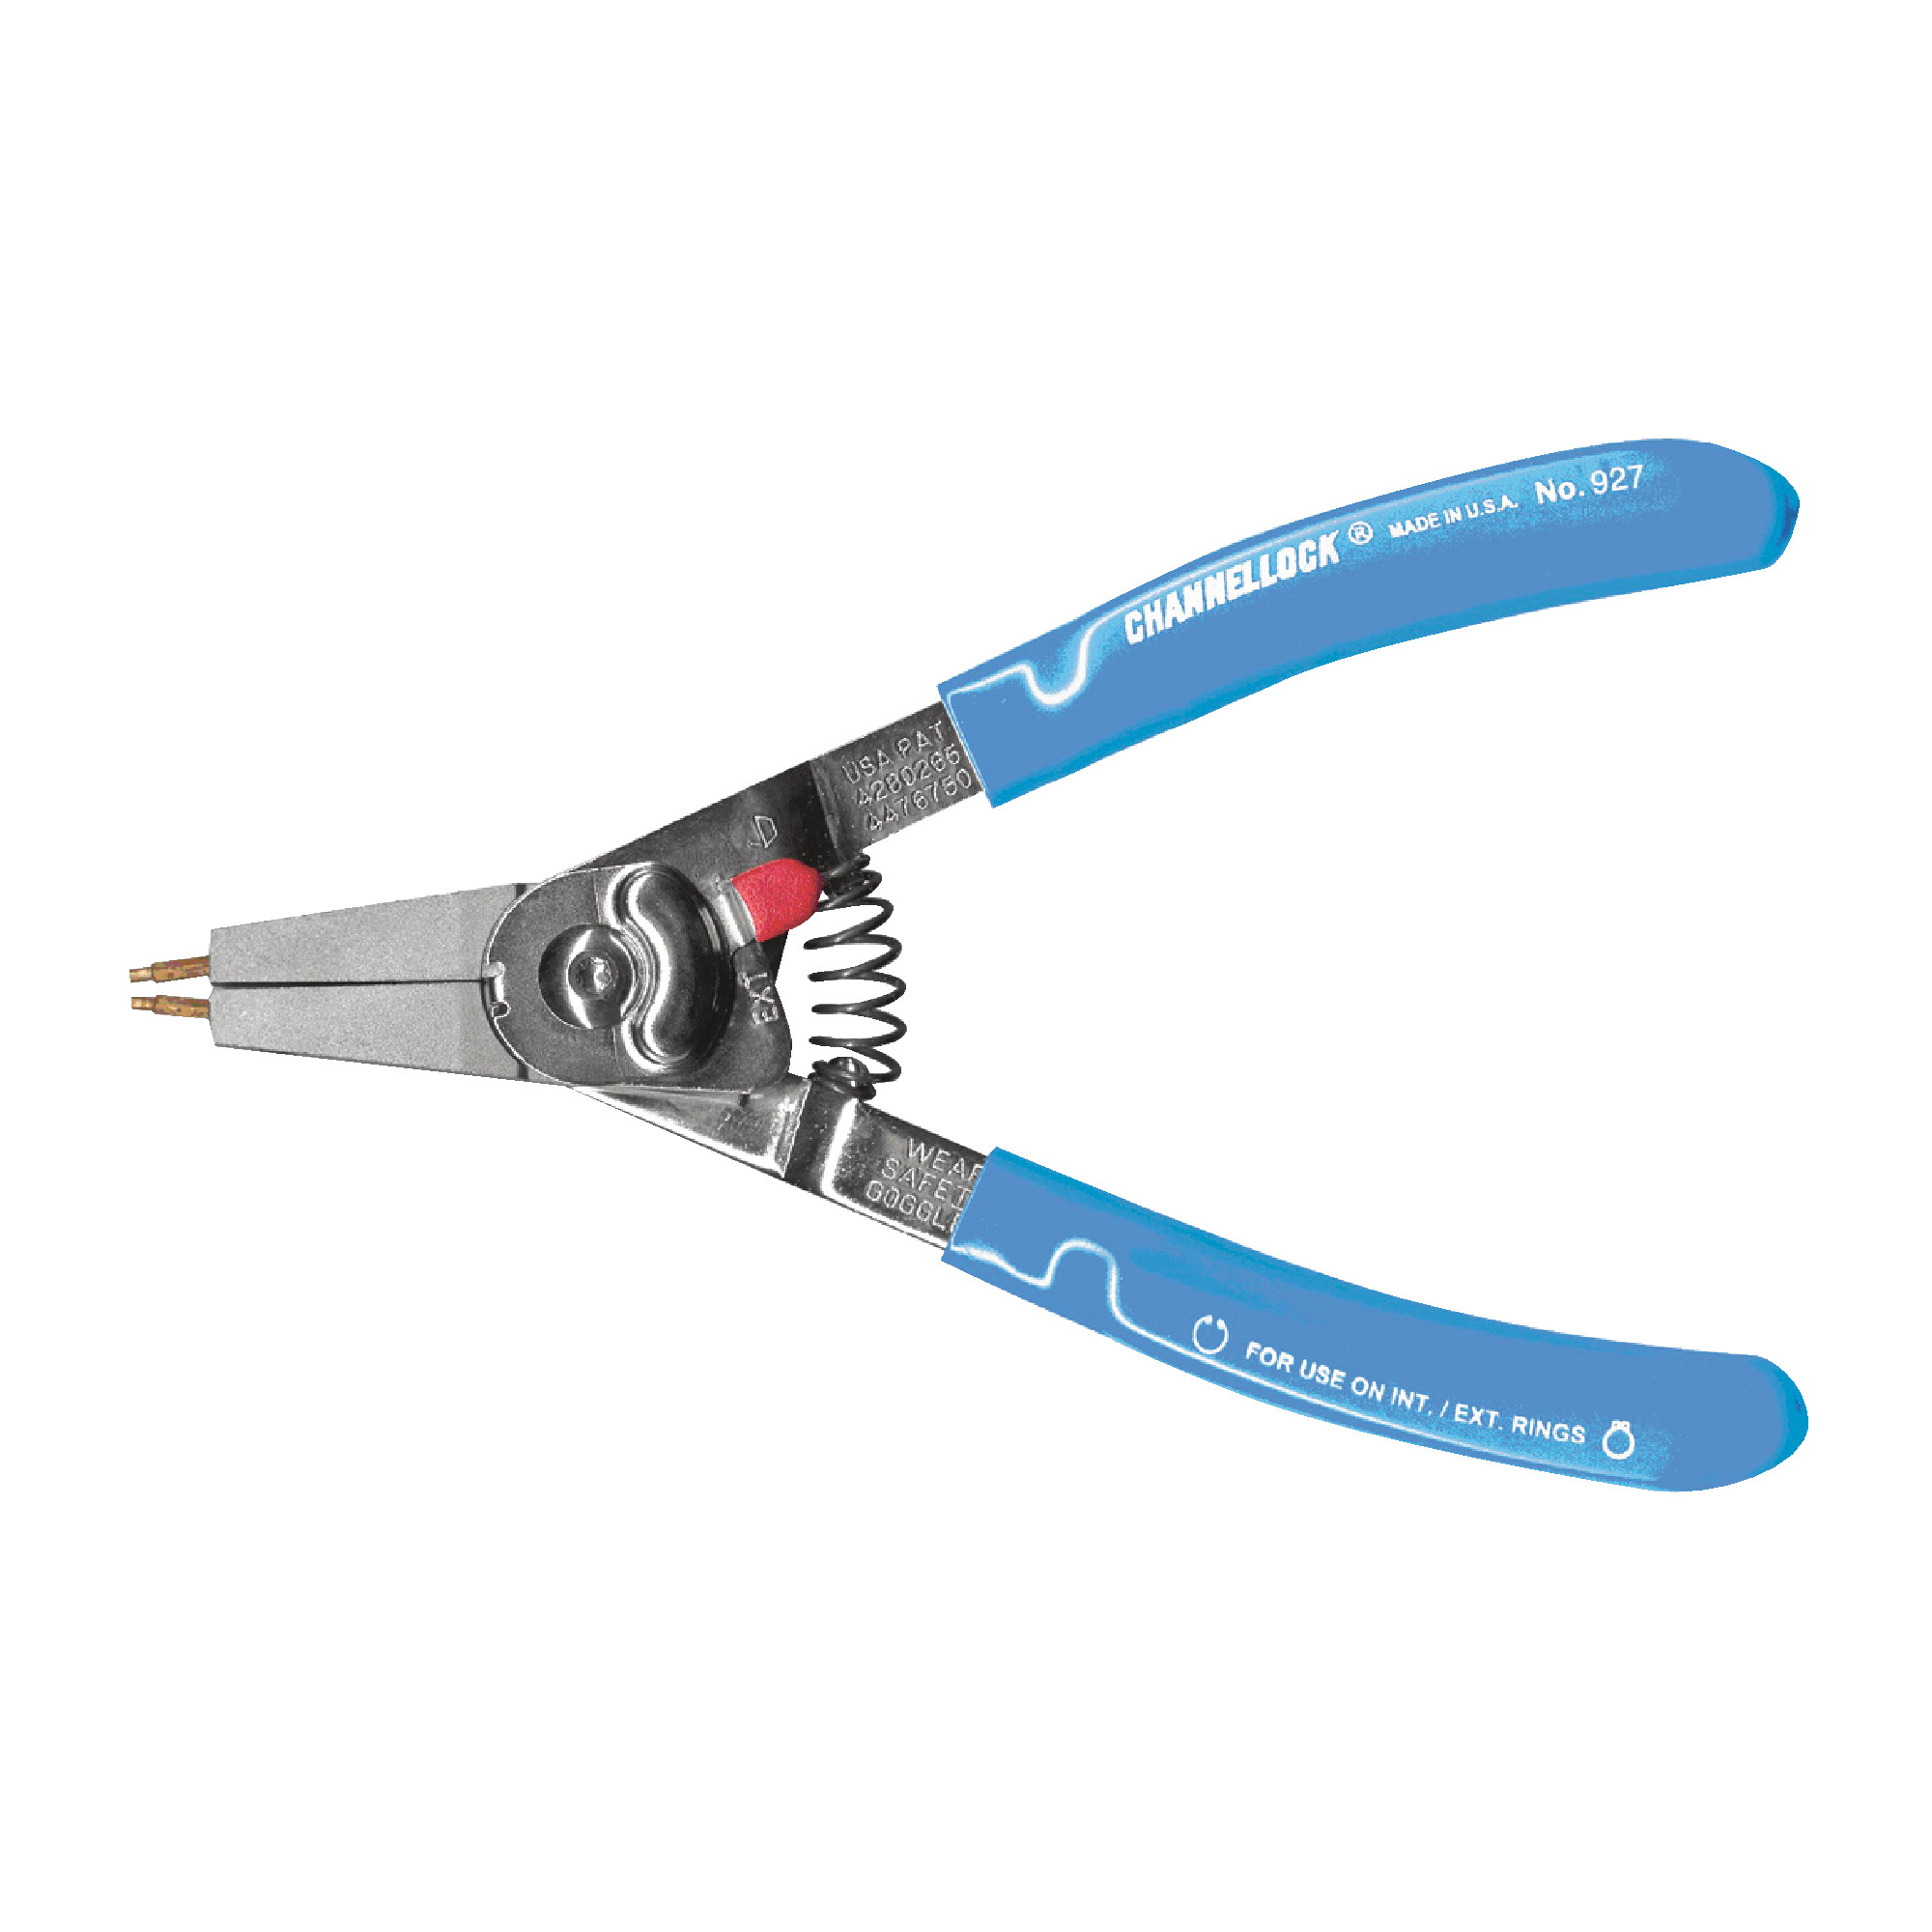 CHANNELLOCK - Snap Ring Pliers